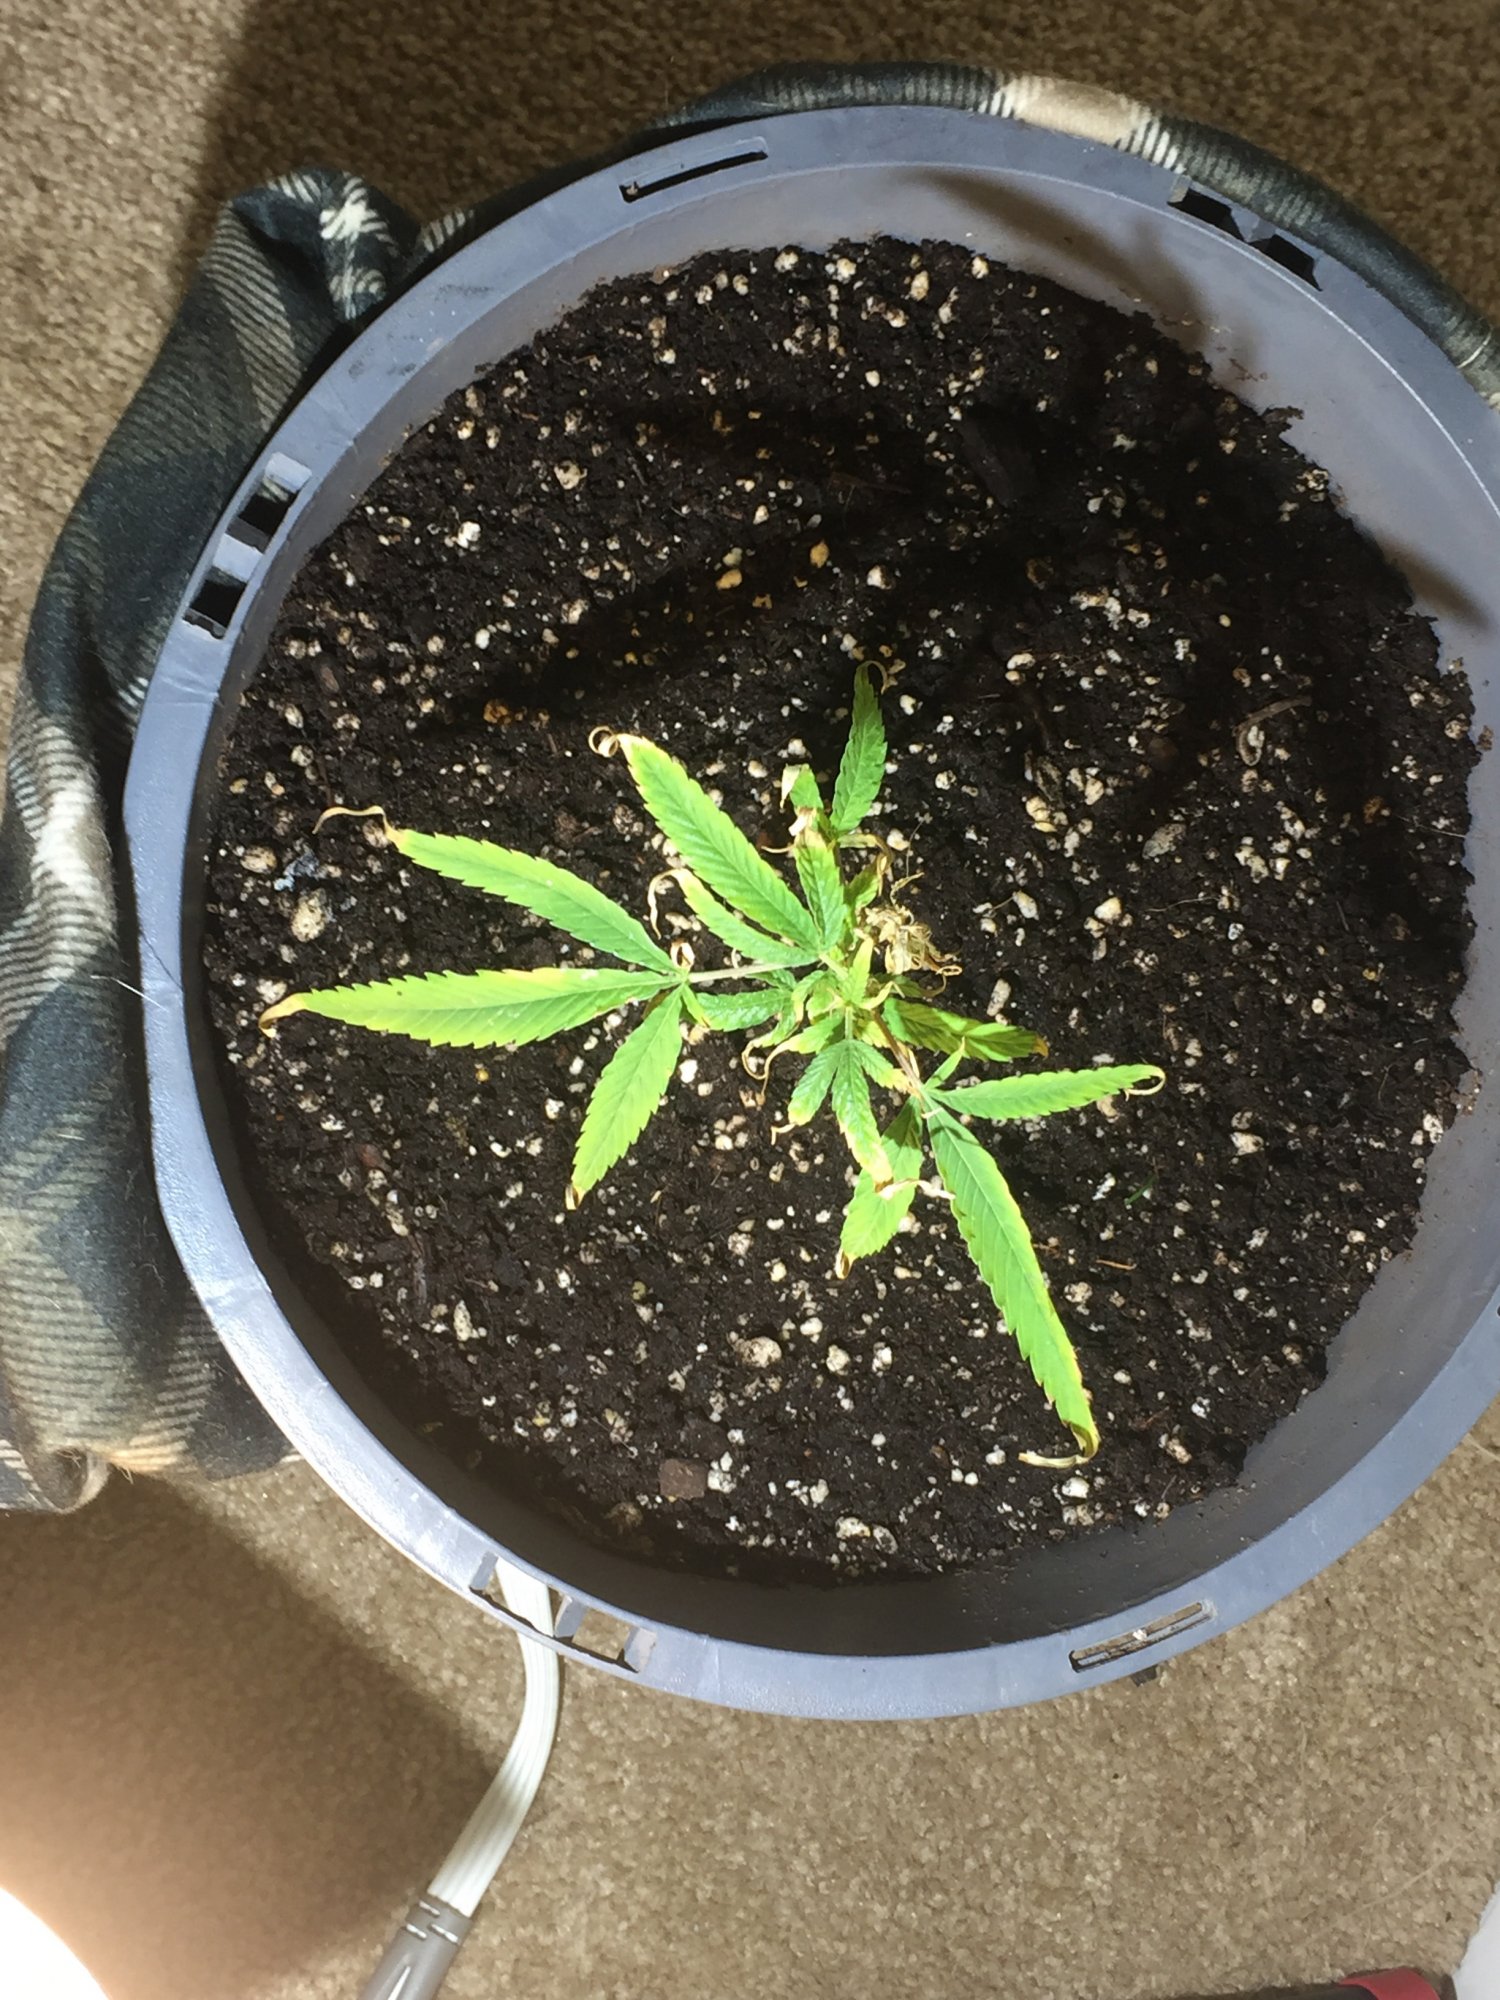 Any help from experience grower